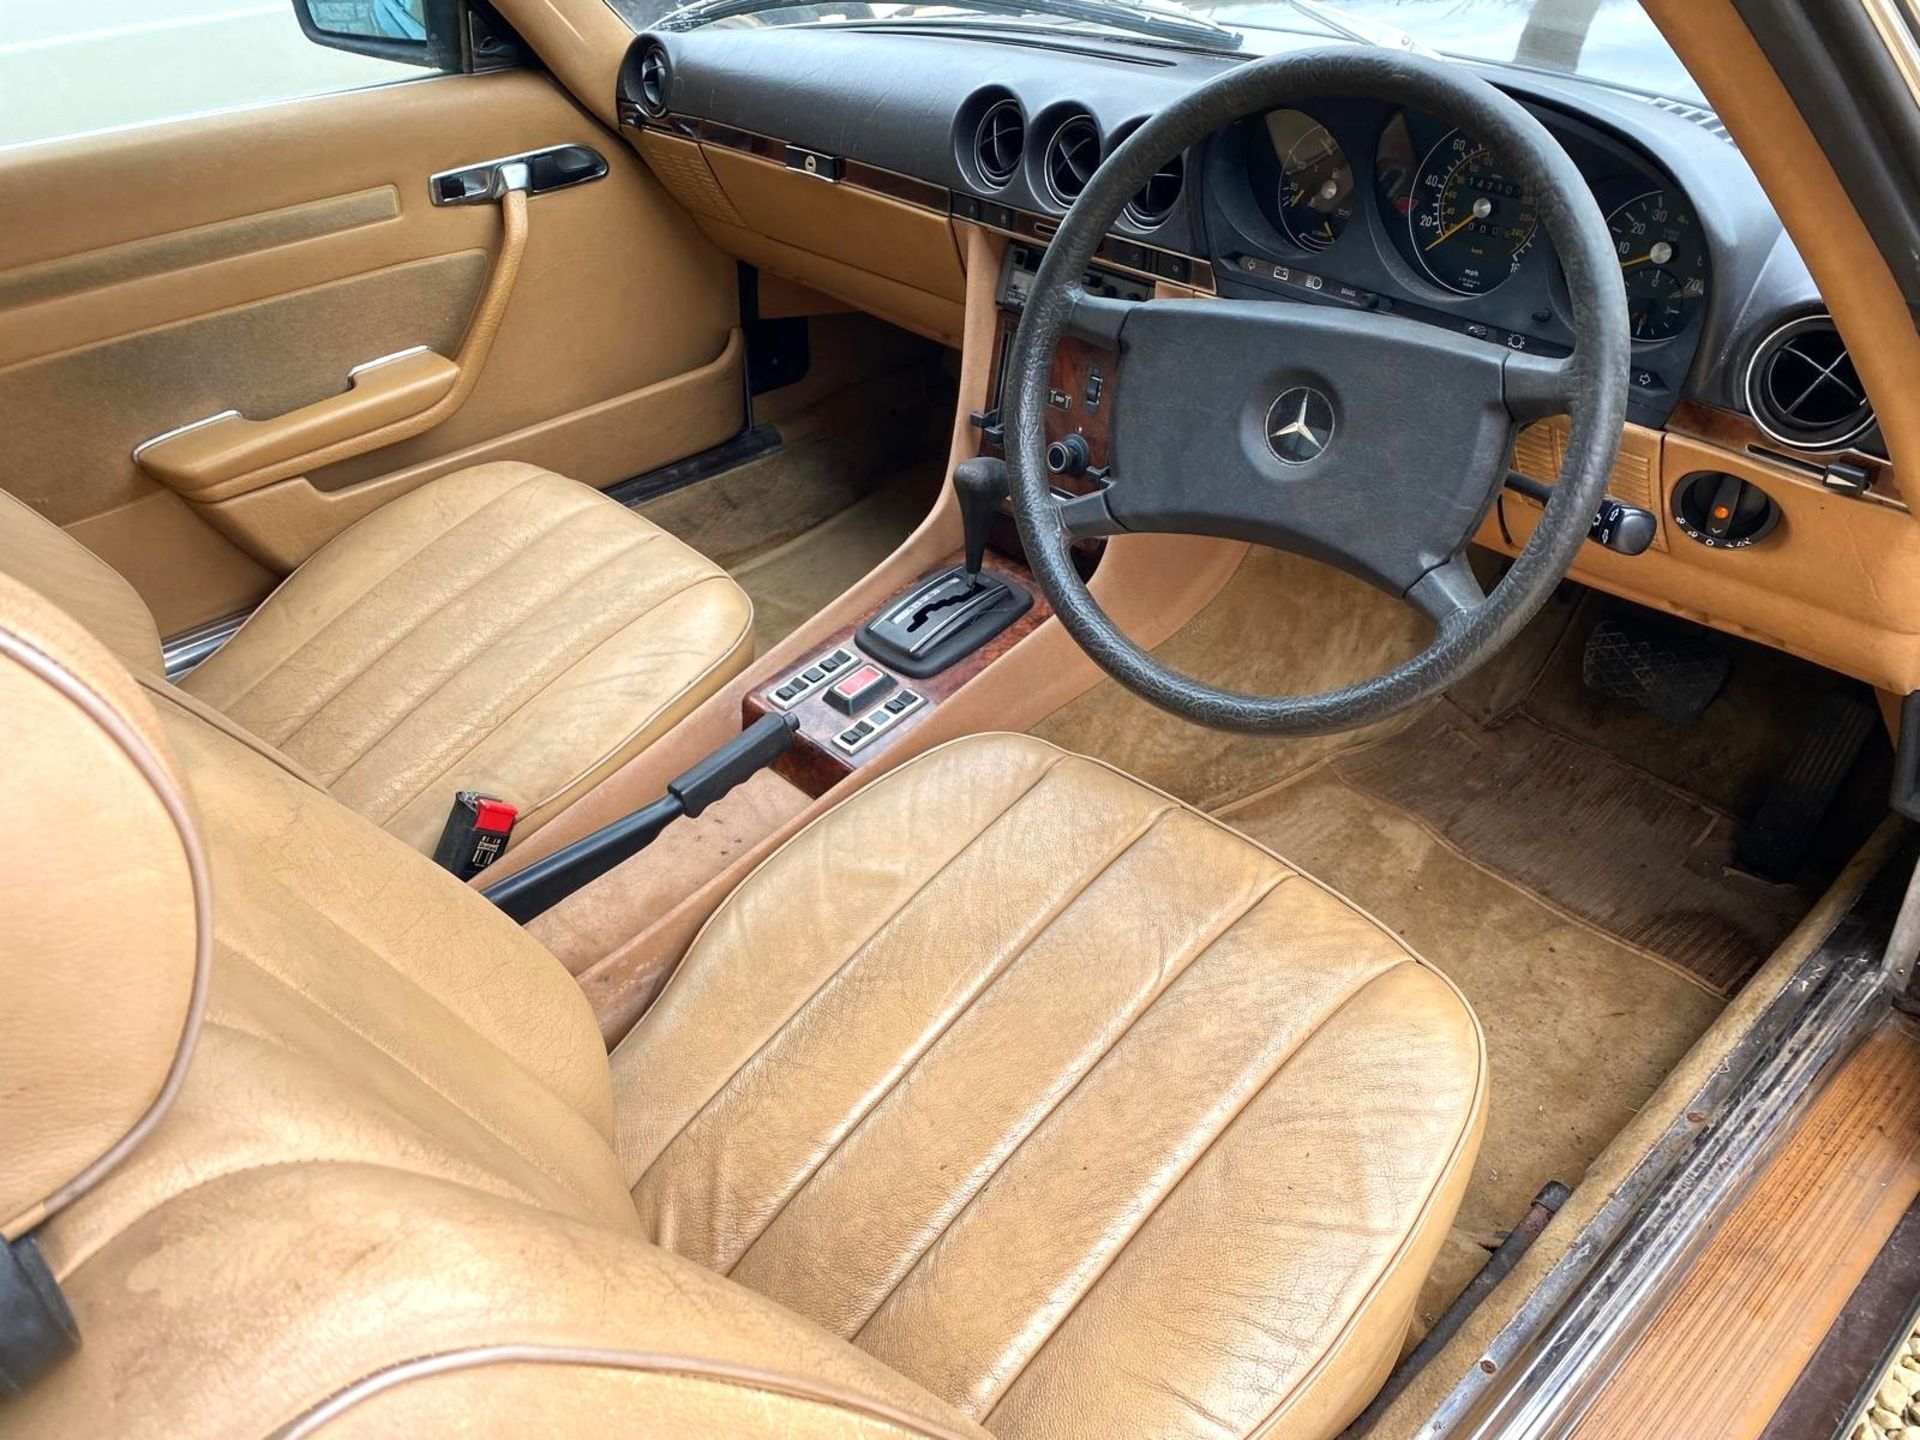 1980 MERCEDES-BENZ 380SLC Registration Number: BWP 946M Chassis Number: 107.025.22.000320 Recorded - Image 7 of 7